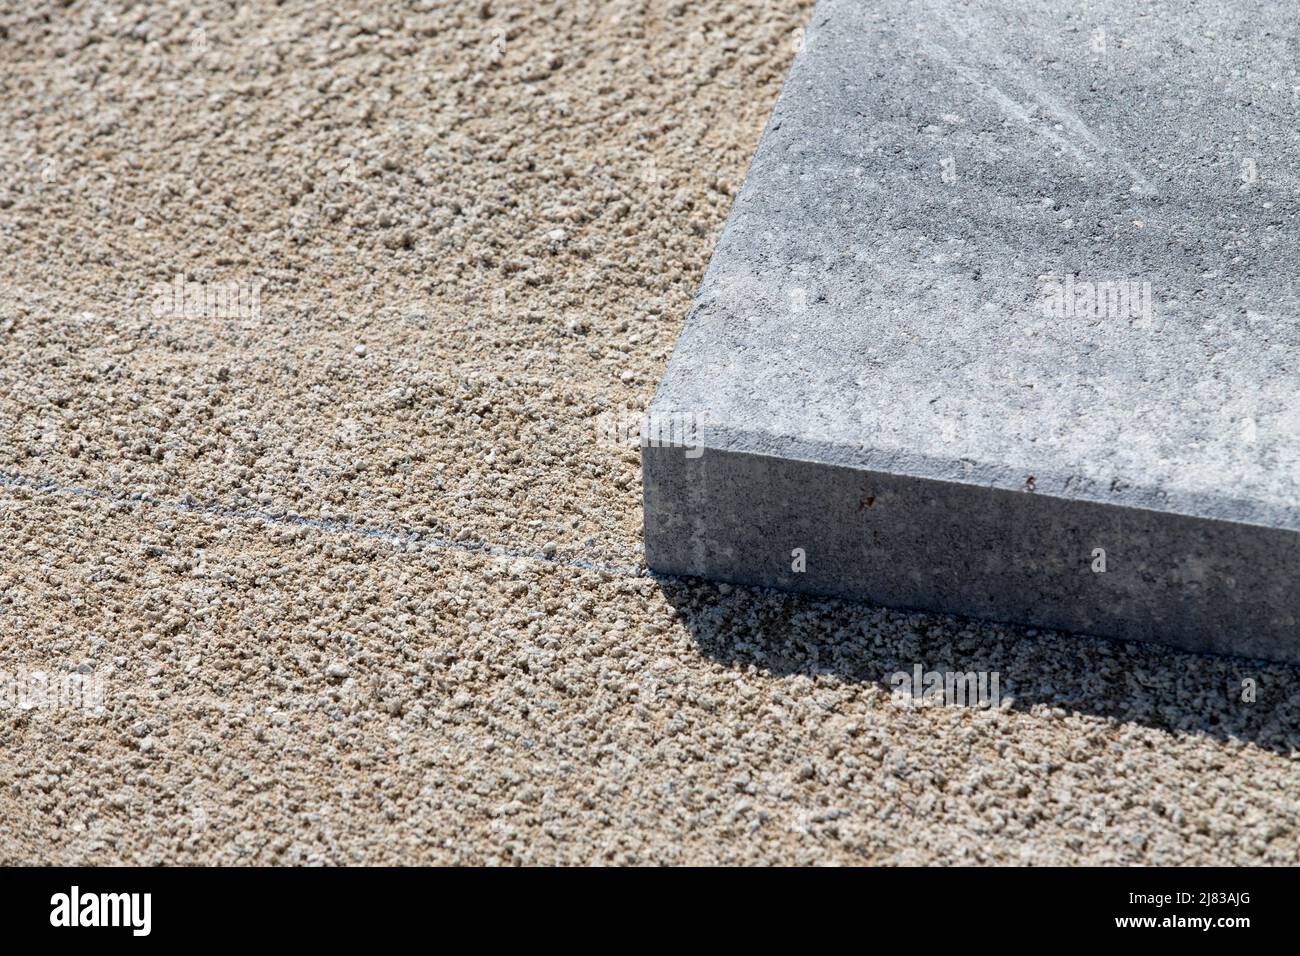 A paving stone or paving brick, set in place on a sand prepared surface. Stock Photo